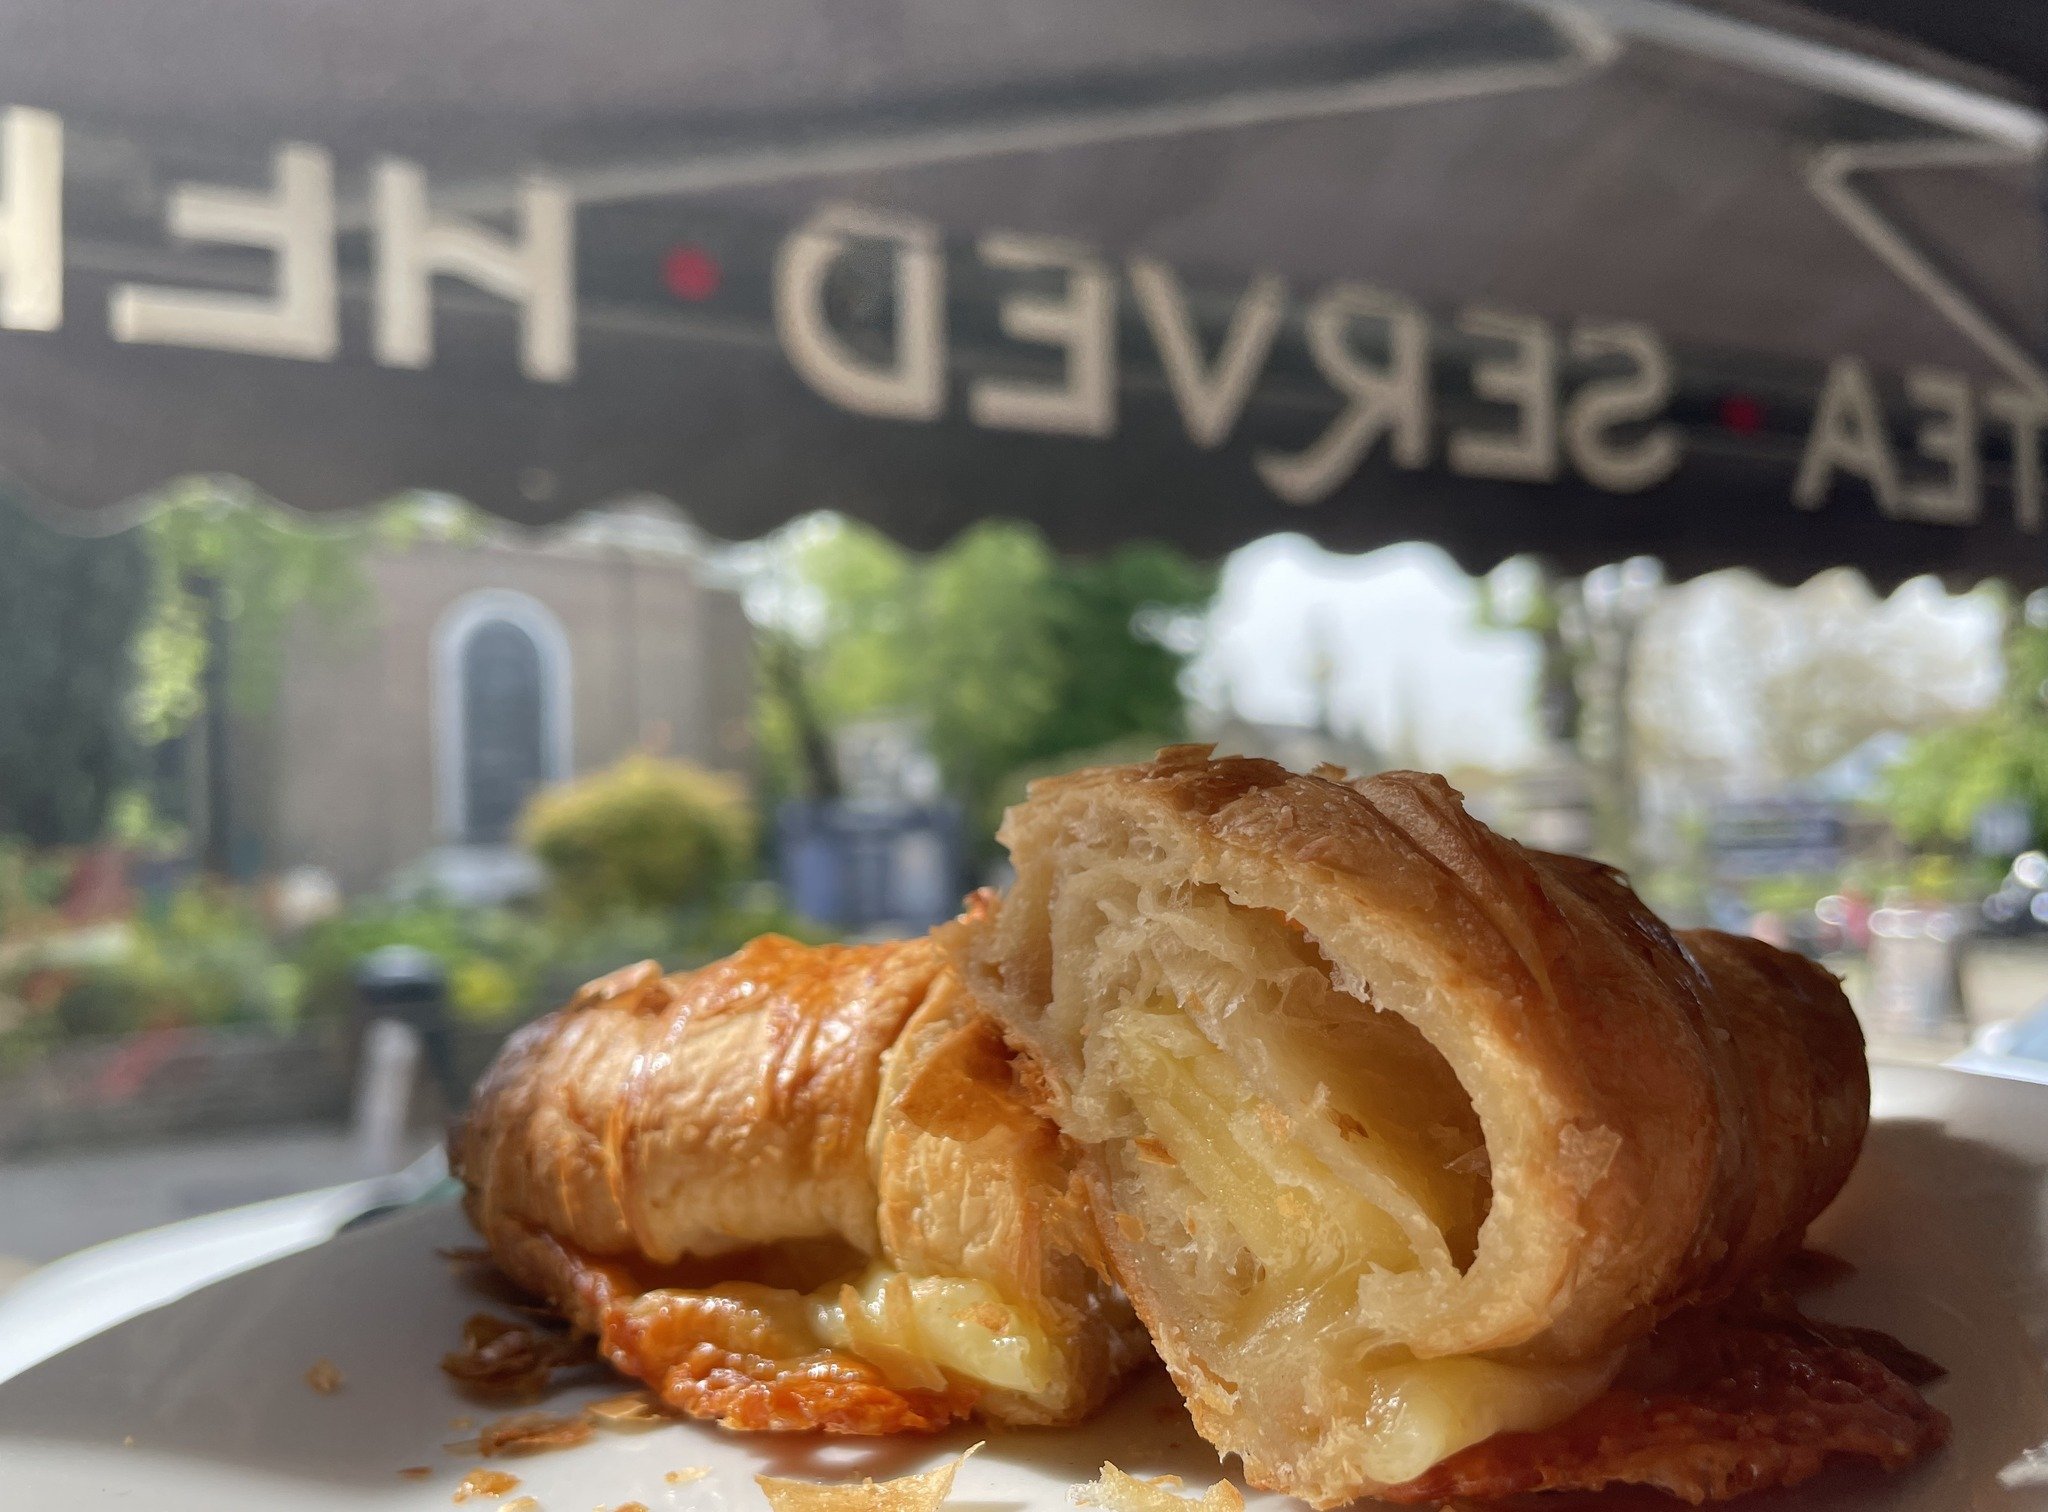 Yes! That is a cheese croissant. Available this Saturday. What are you waiting for?

#cheesecroissant #yummyfood #hopeandlane #dealkent❤ #dealinkent